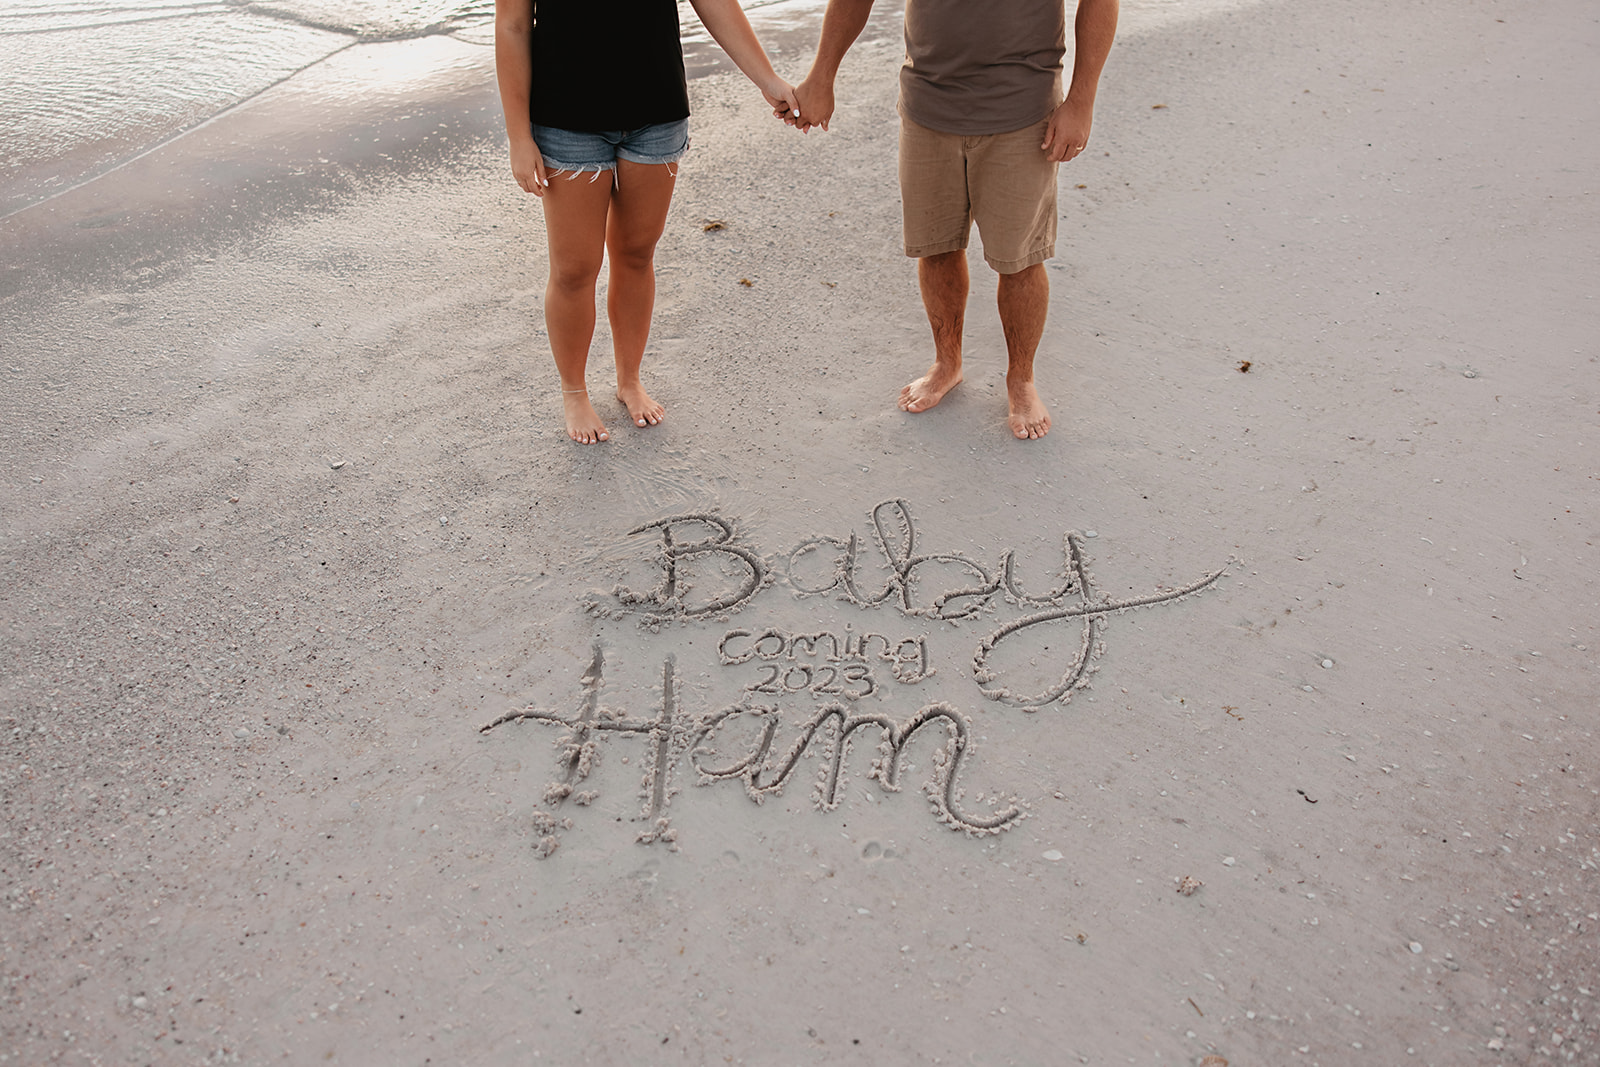 the couple standing over the message written in the sand